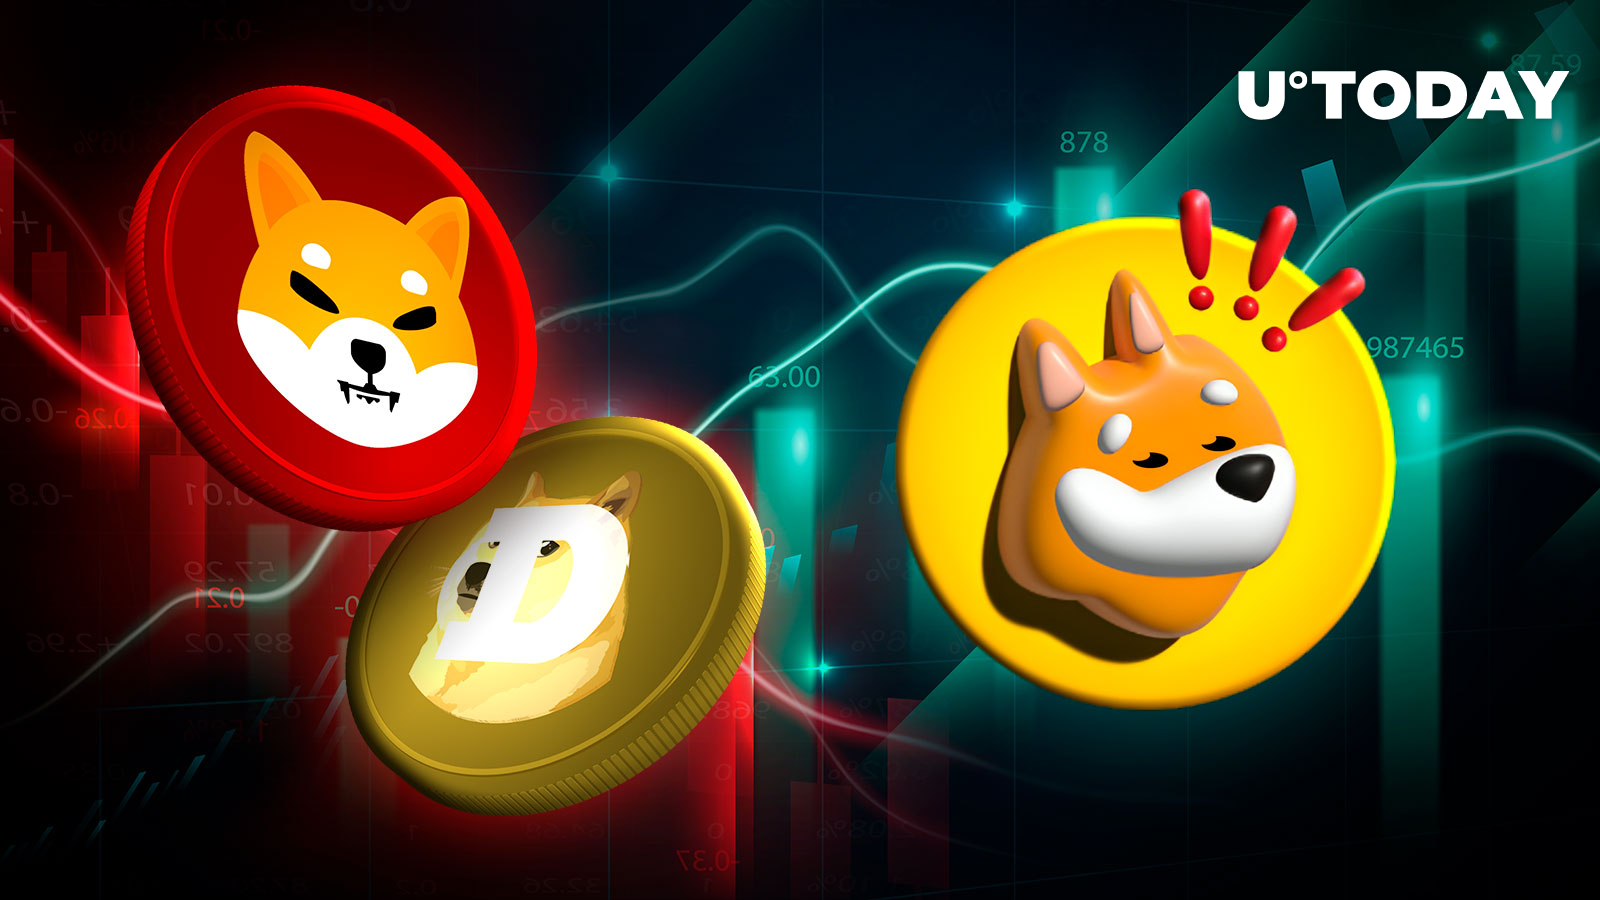 Solana’s BONK Surpasses DOGE and SHIB in Trading Volume on Coinbase